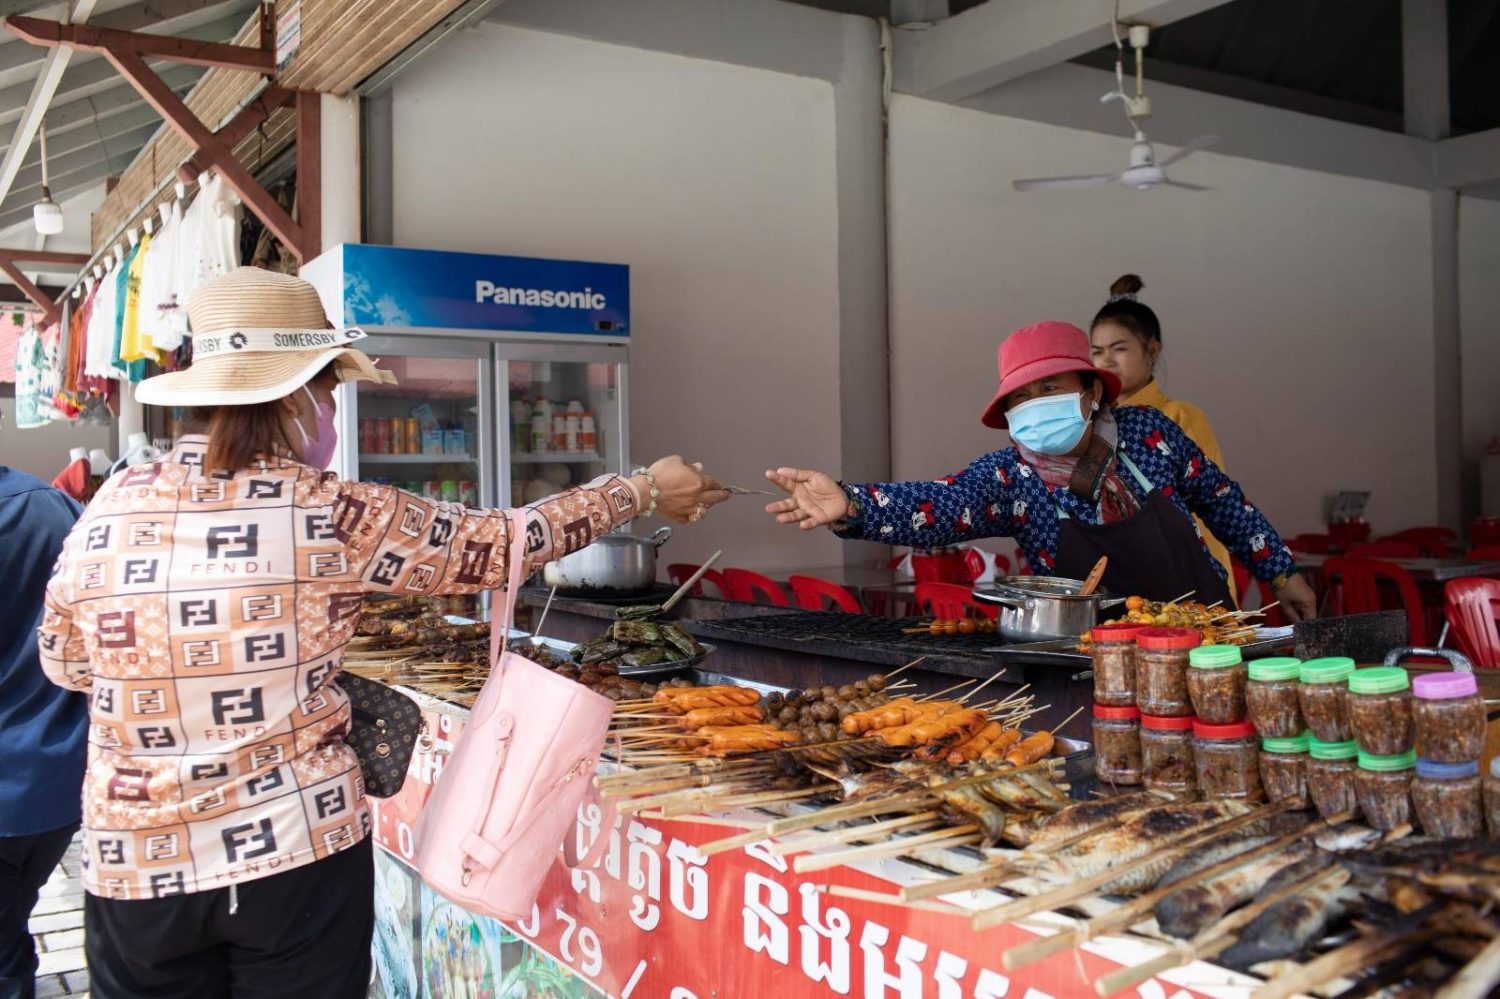 Hok Sothea collects money from a customer at her grilled meat and chicken stall in the new Angkor Archaeological Park retail center on April 1, 2022. (Roun Ry/VOD)